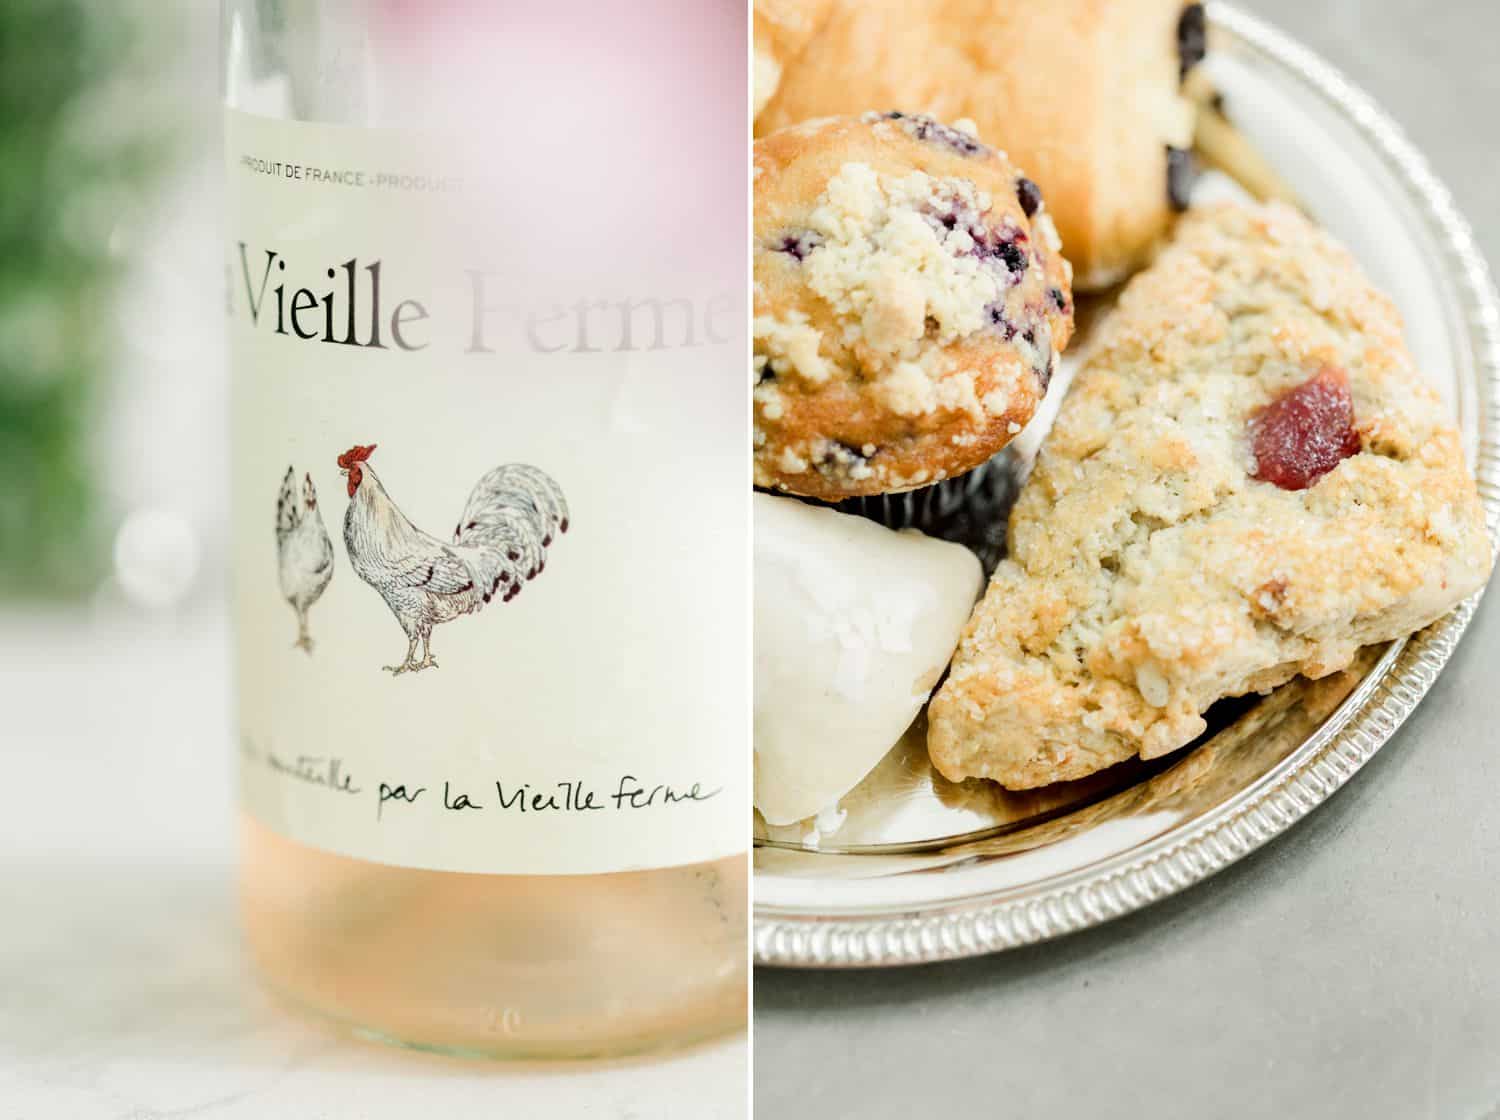 A close-up photos of a bottle of rosé beside a detail shot of a plate of scones and pastries.